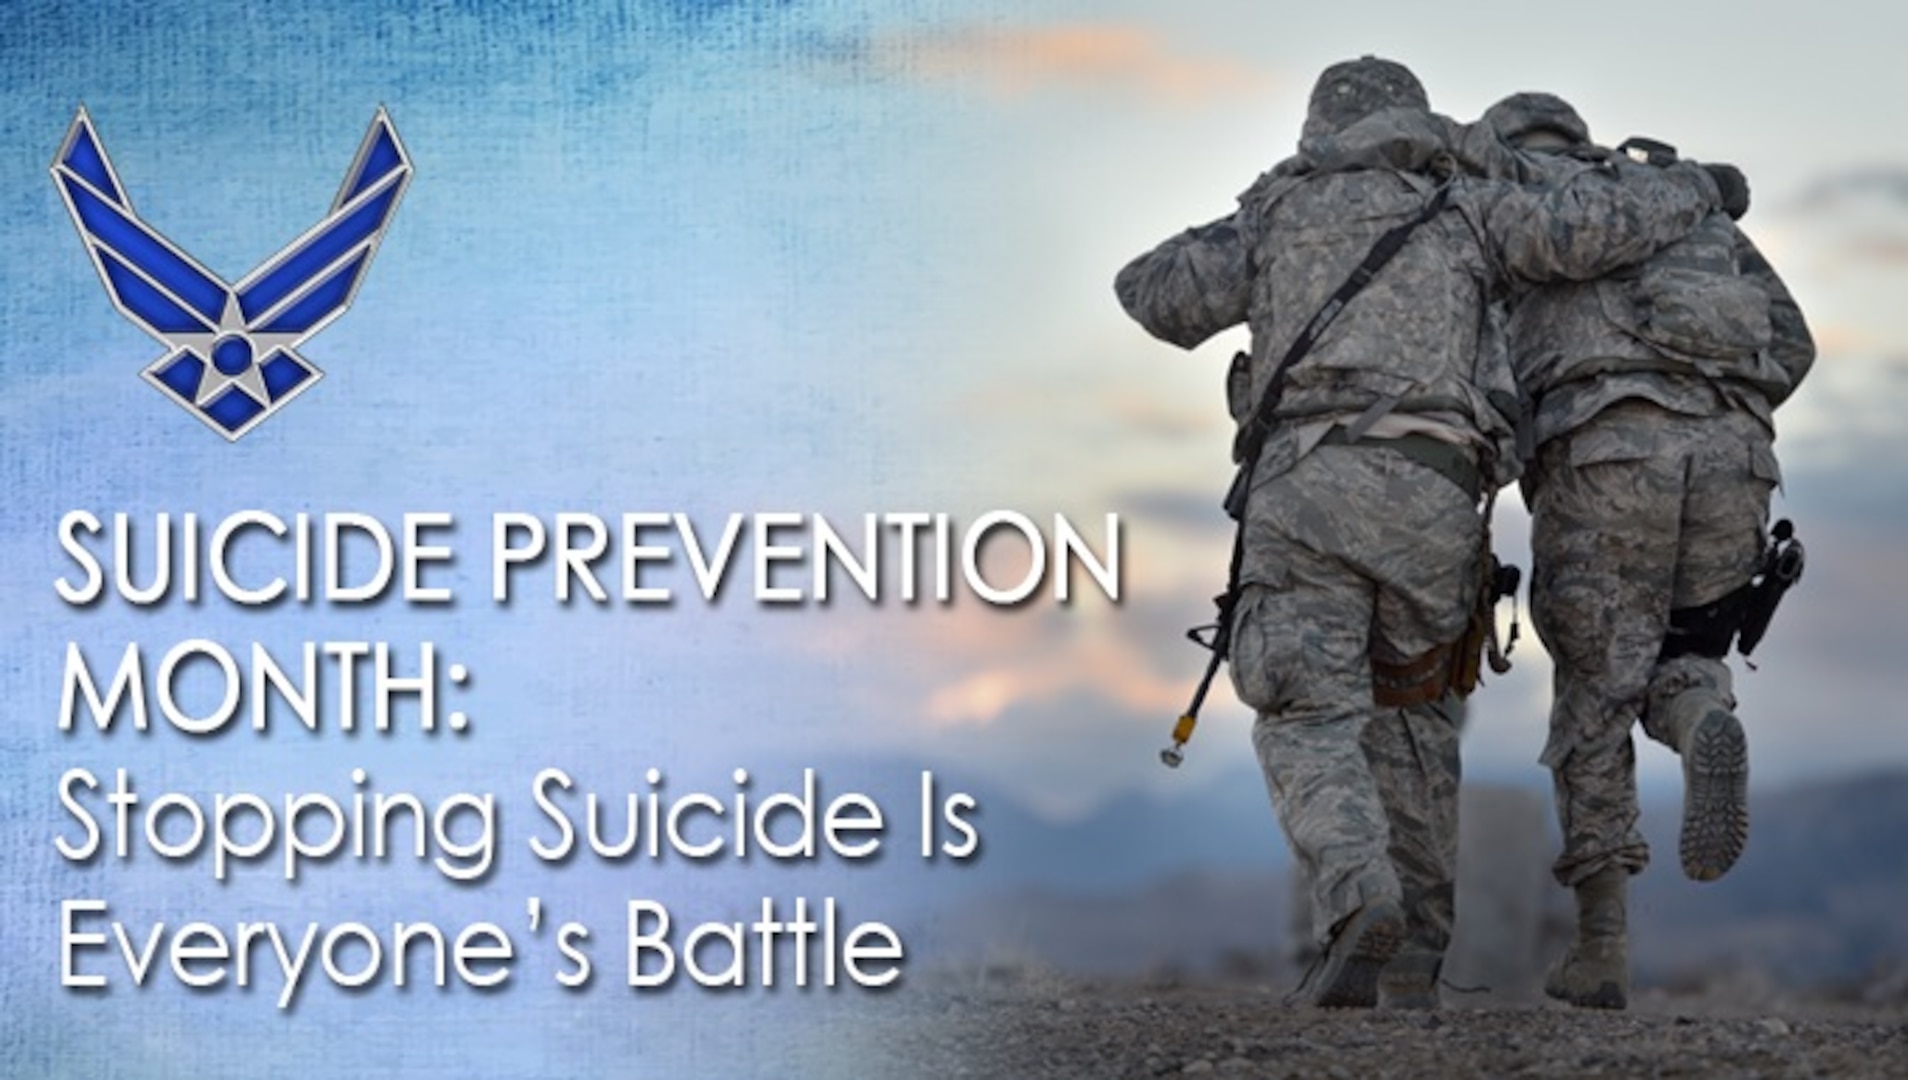 Suicide prevention month stopping suicide is everyone’s battle > Joint